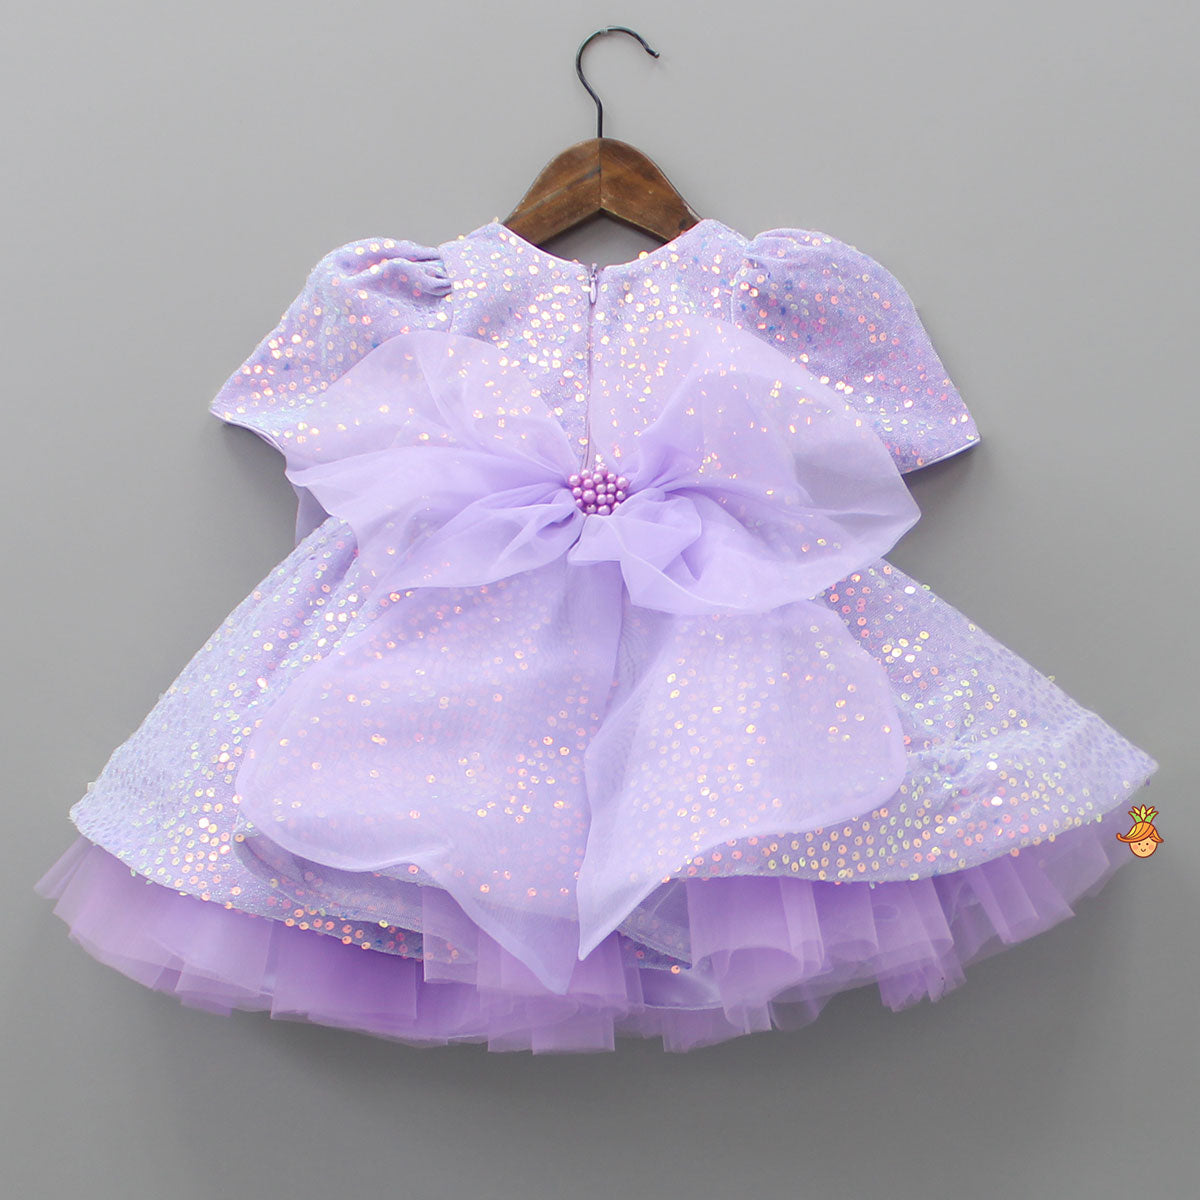 Purple Sequin Dress Adorned With Matching Bows